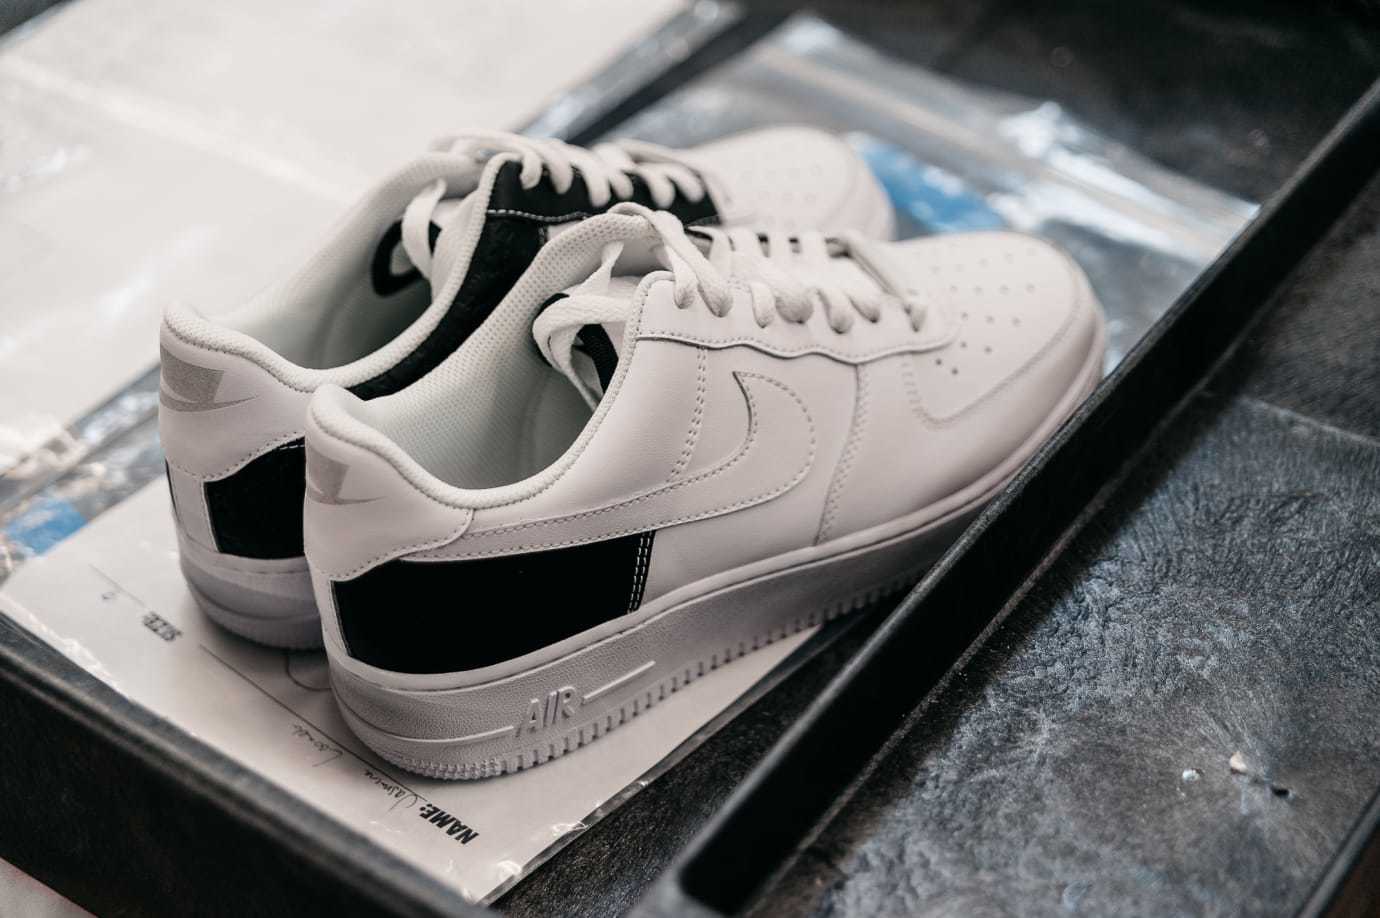 Nike Flyleather Air Force 1 1